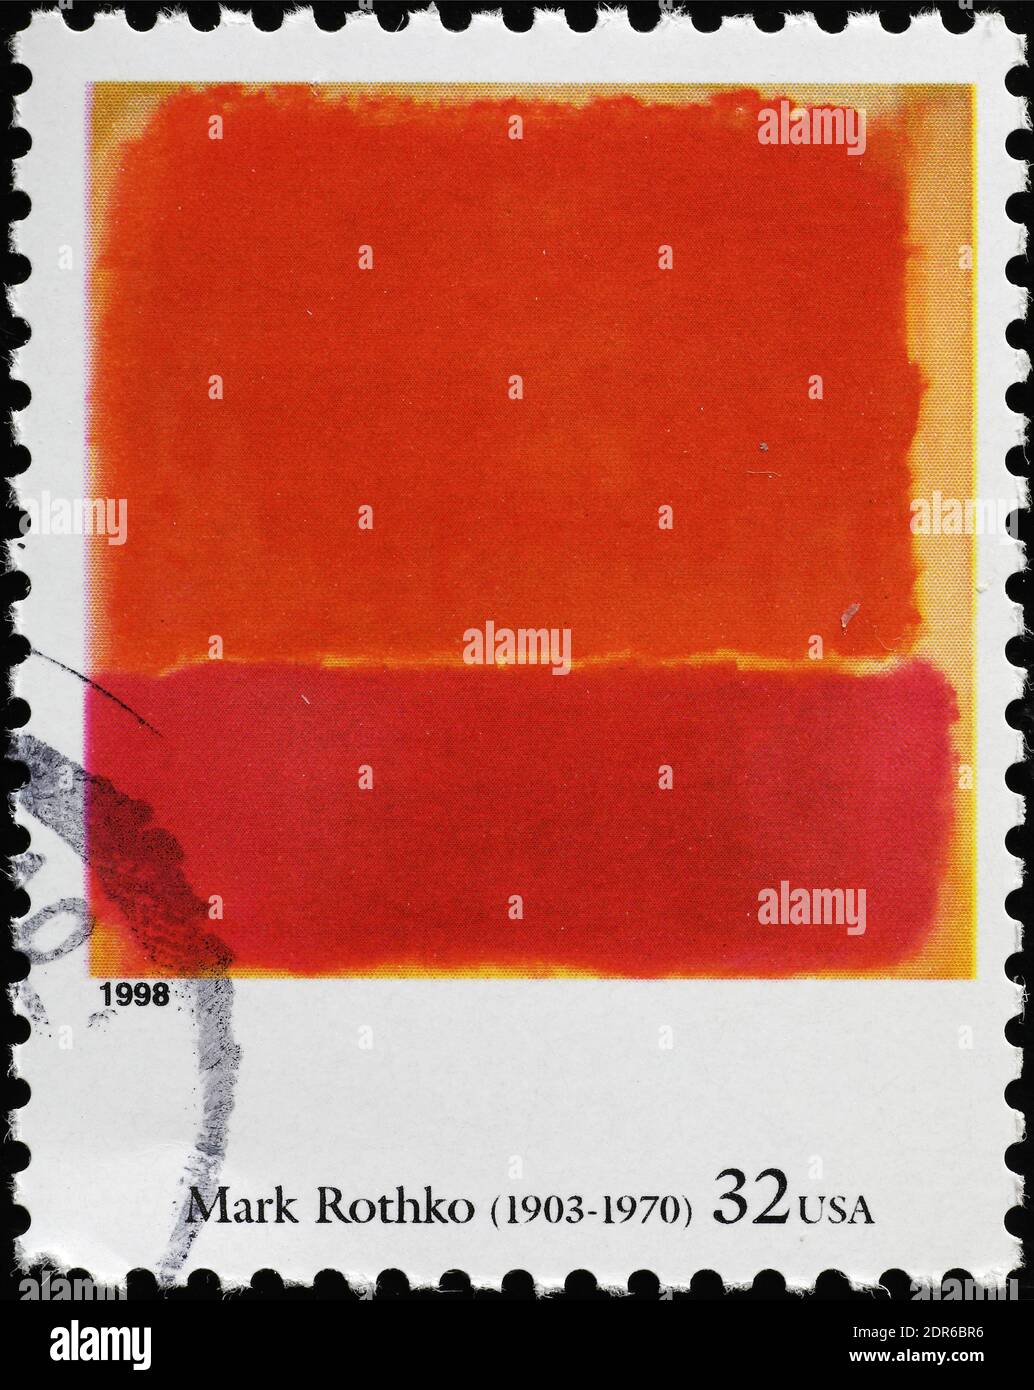 Painting No12 by Mark Rothko on postage stamp Stock Photo